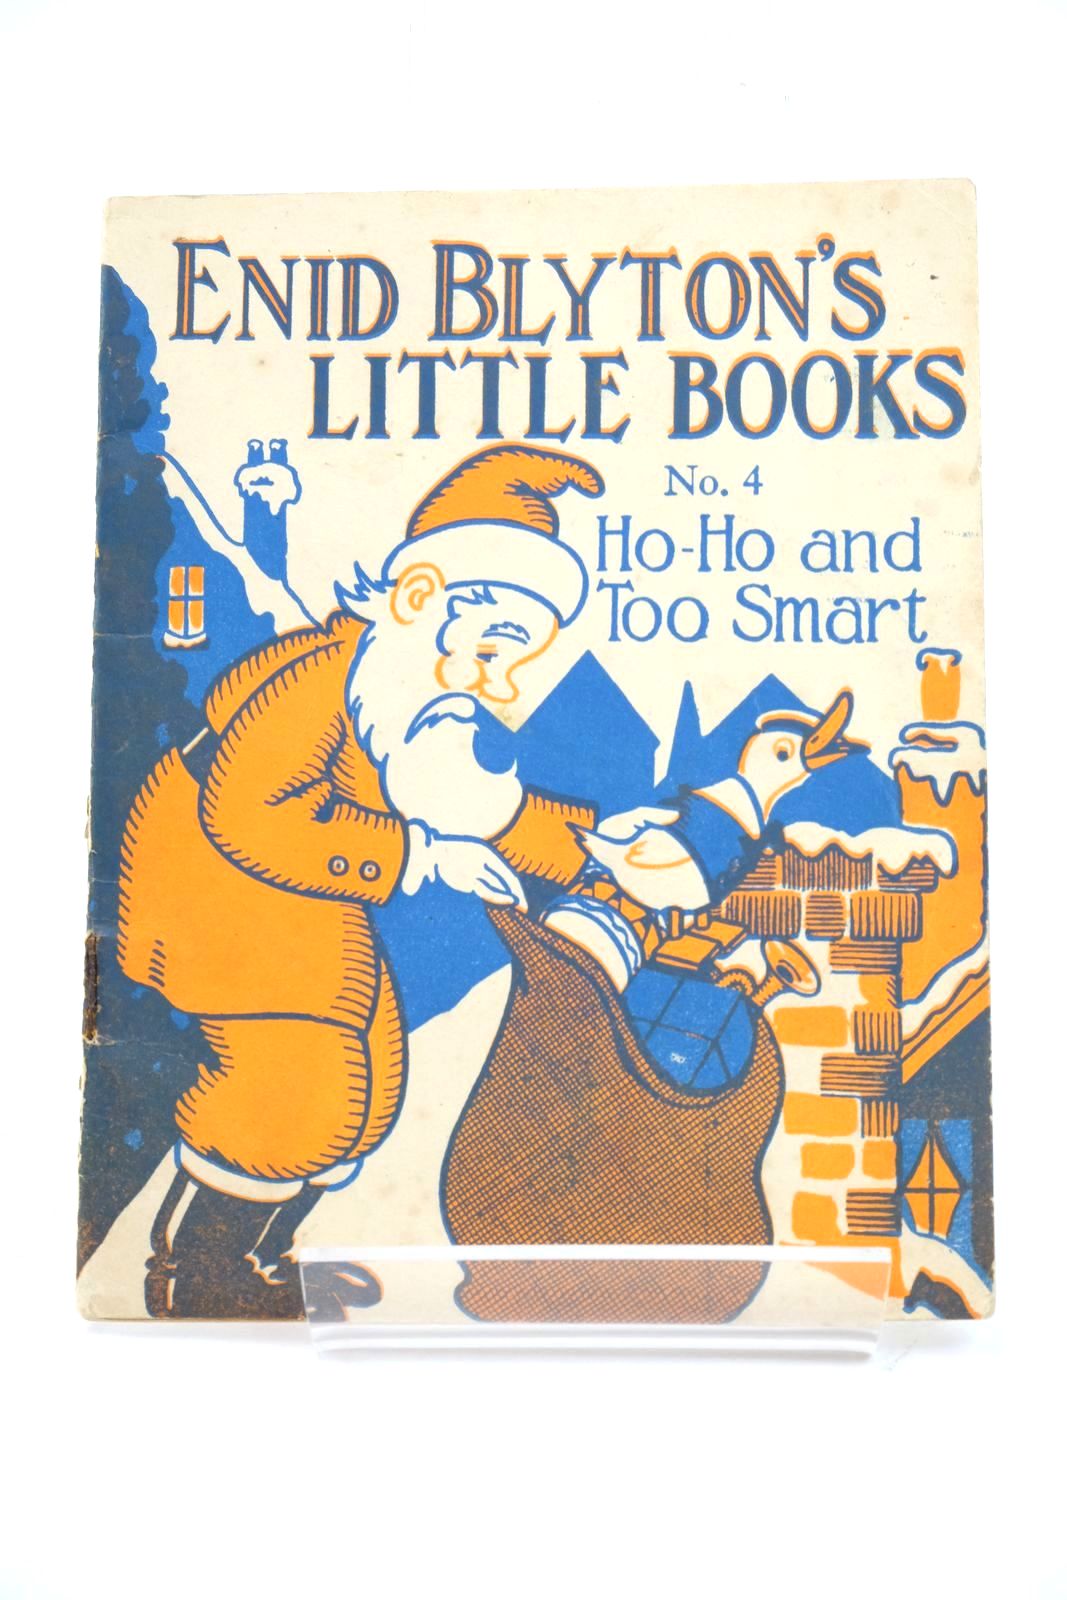 Photo of ENID BLYTON'S LITTLE BOOKS NO. 4 - HO-HO AND TOO SMART written by Blyton, Enid illustrated by Kerr, Alfred E. published by Evans Brothers Limited (STOCK CODE: 1321963)  for sale by Stella & Rose's Books